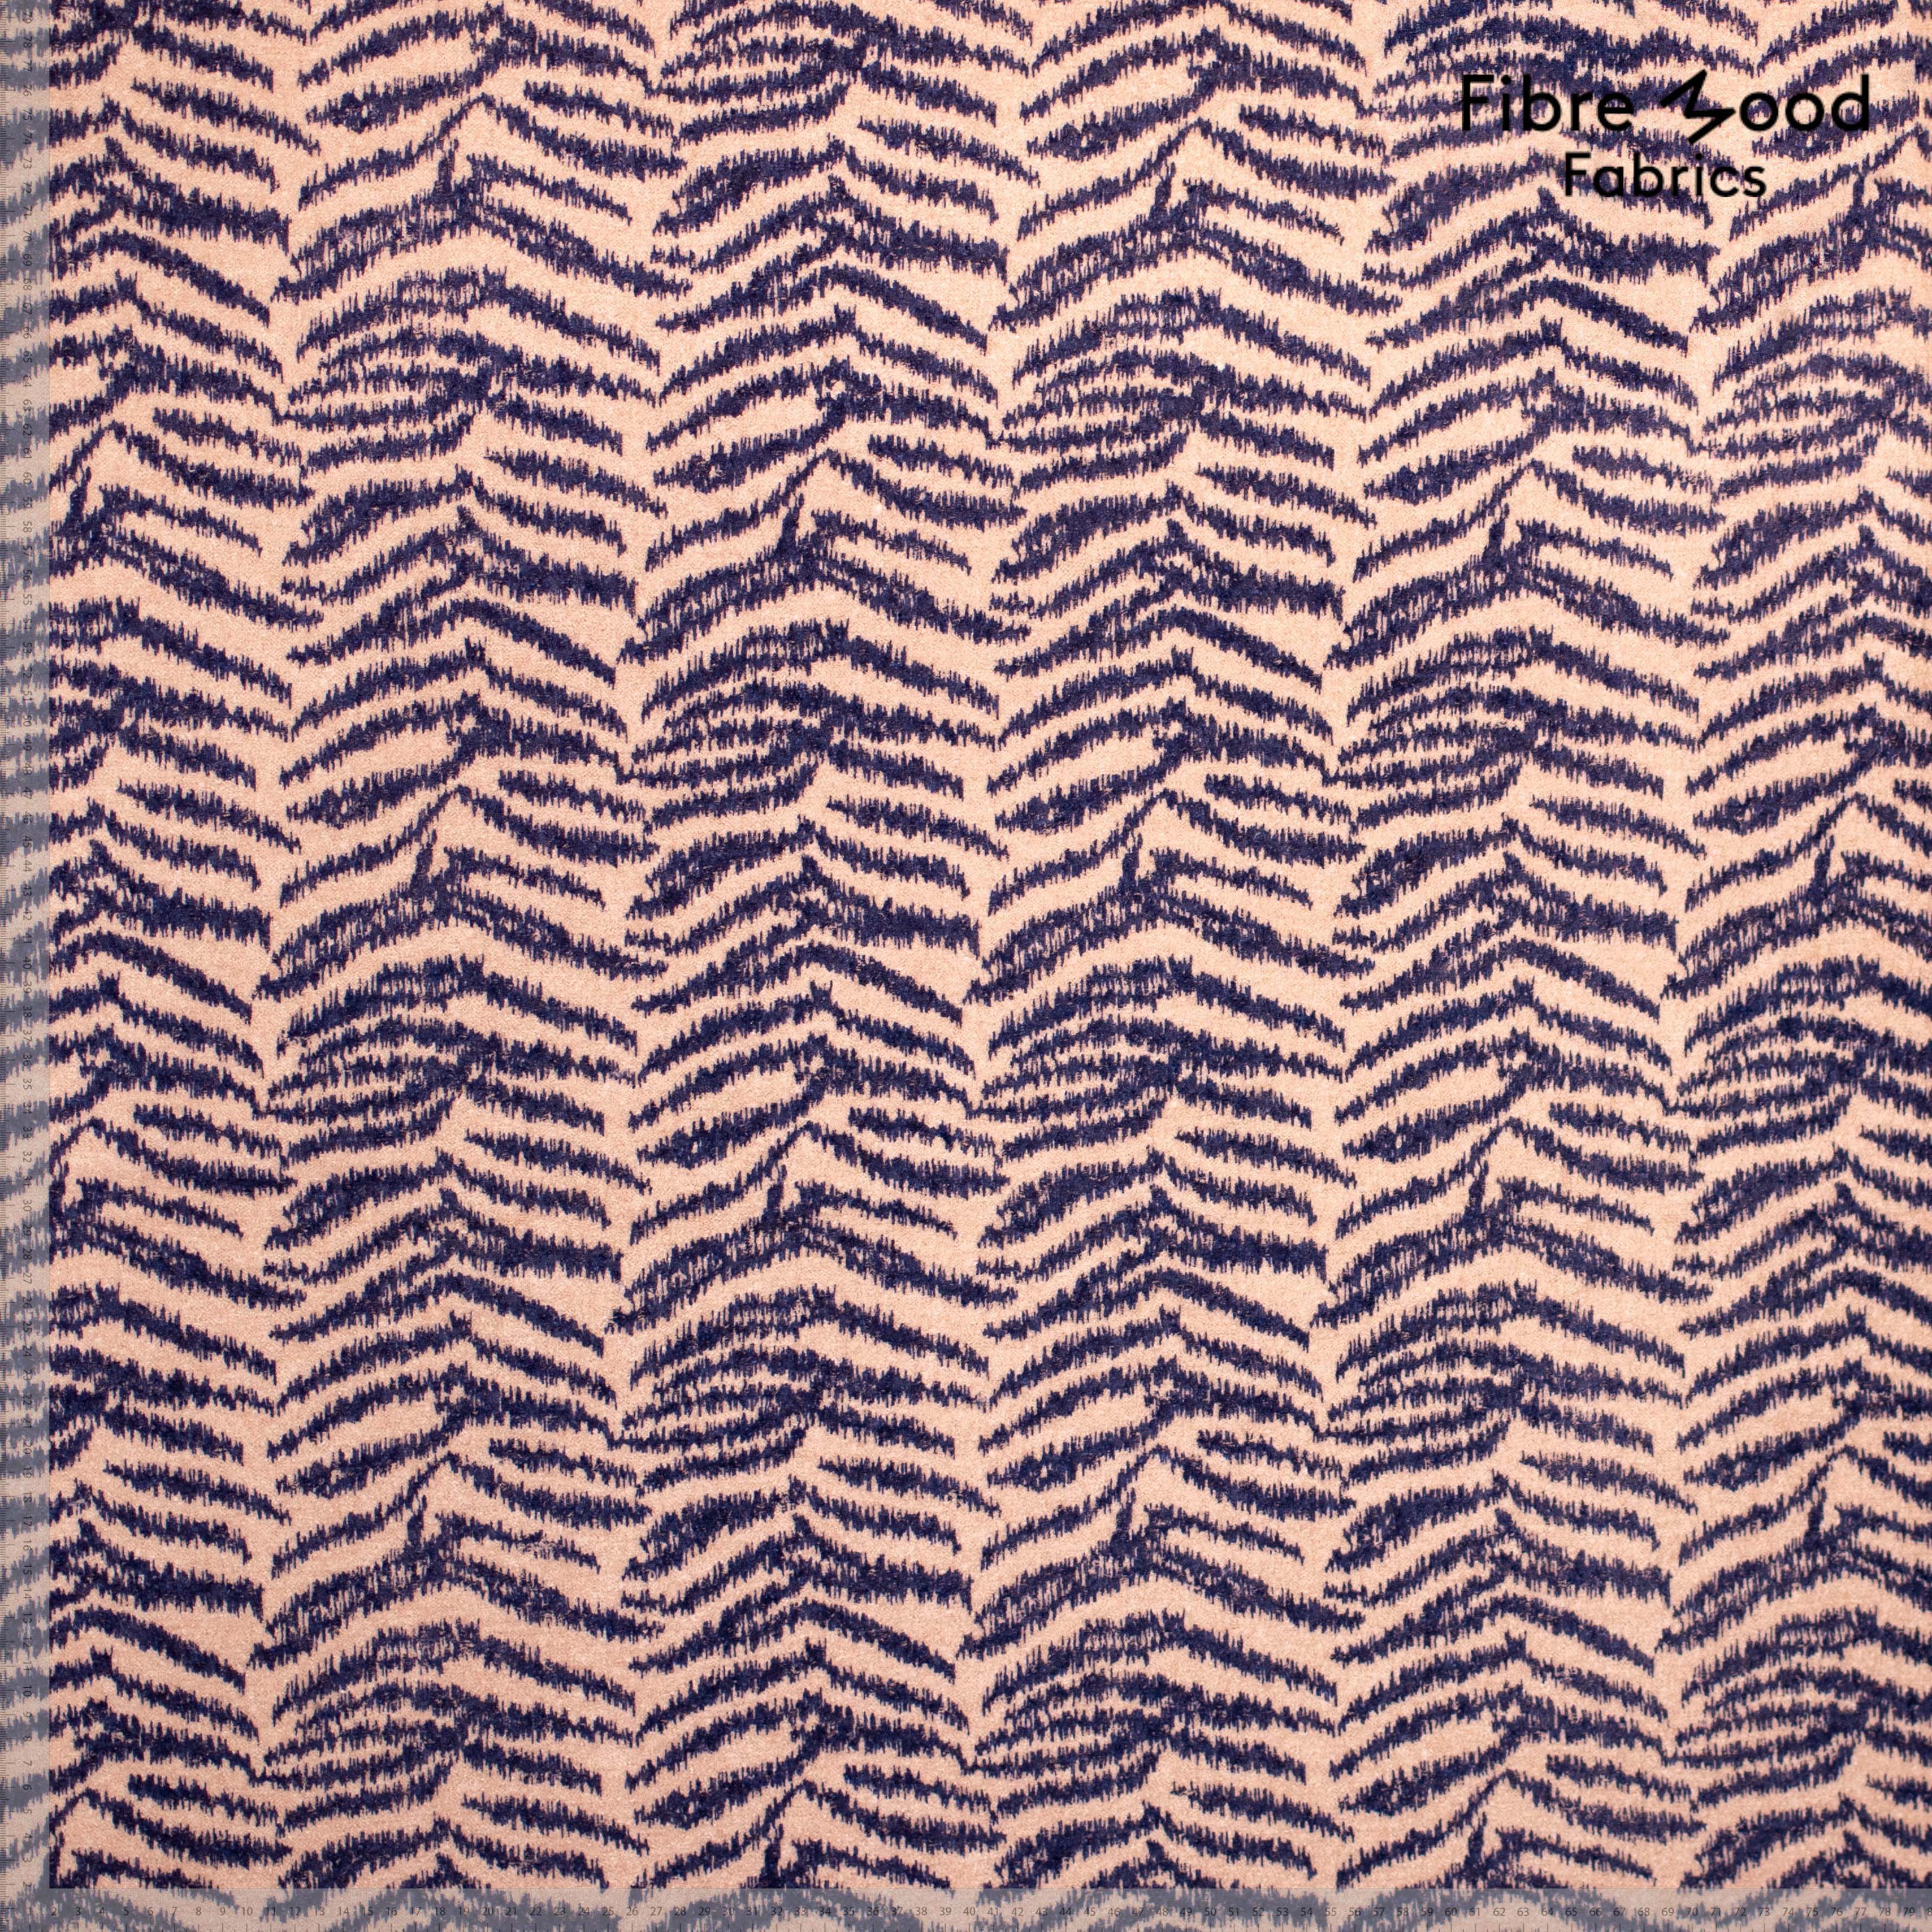 No. 452 knitted wool fabric with zebra pattern